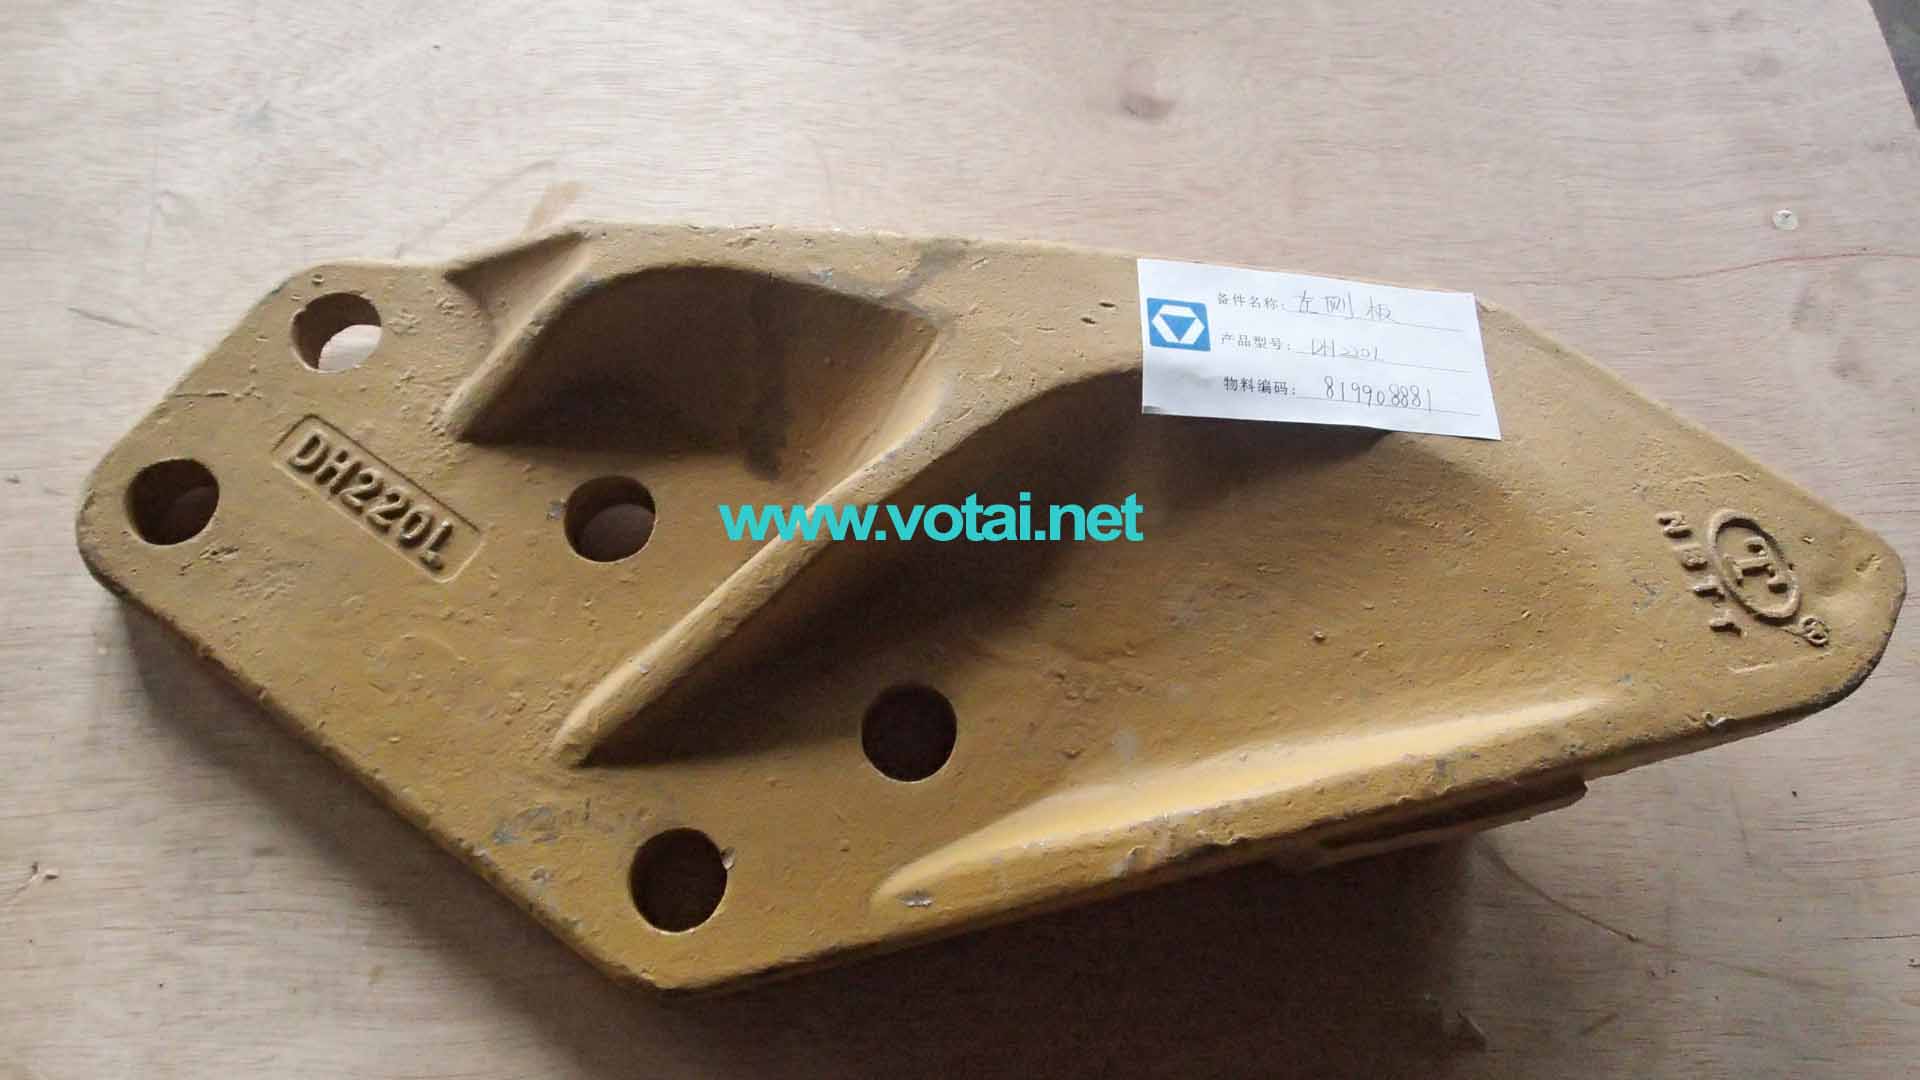 Tianjin Votai - XCMG Excavator Parts Supplier, XCMG XE80E, XE135B, XE150D, XE215C, XE215CLL, XE235C, XE265C, XE260CLL, XE335C, XE370CA, XE470C spare parts;